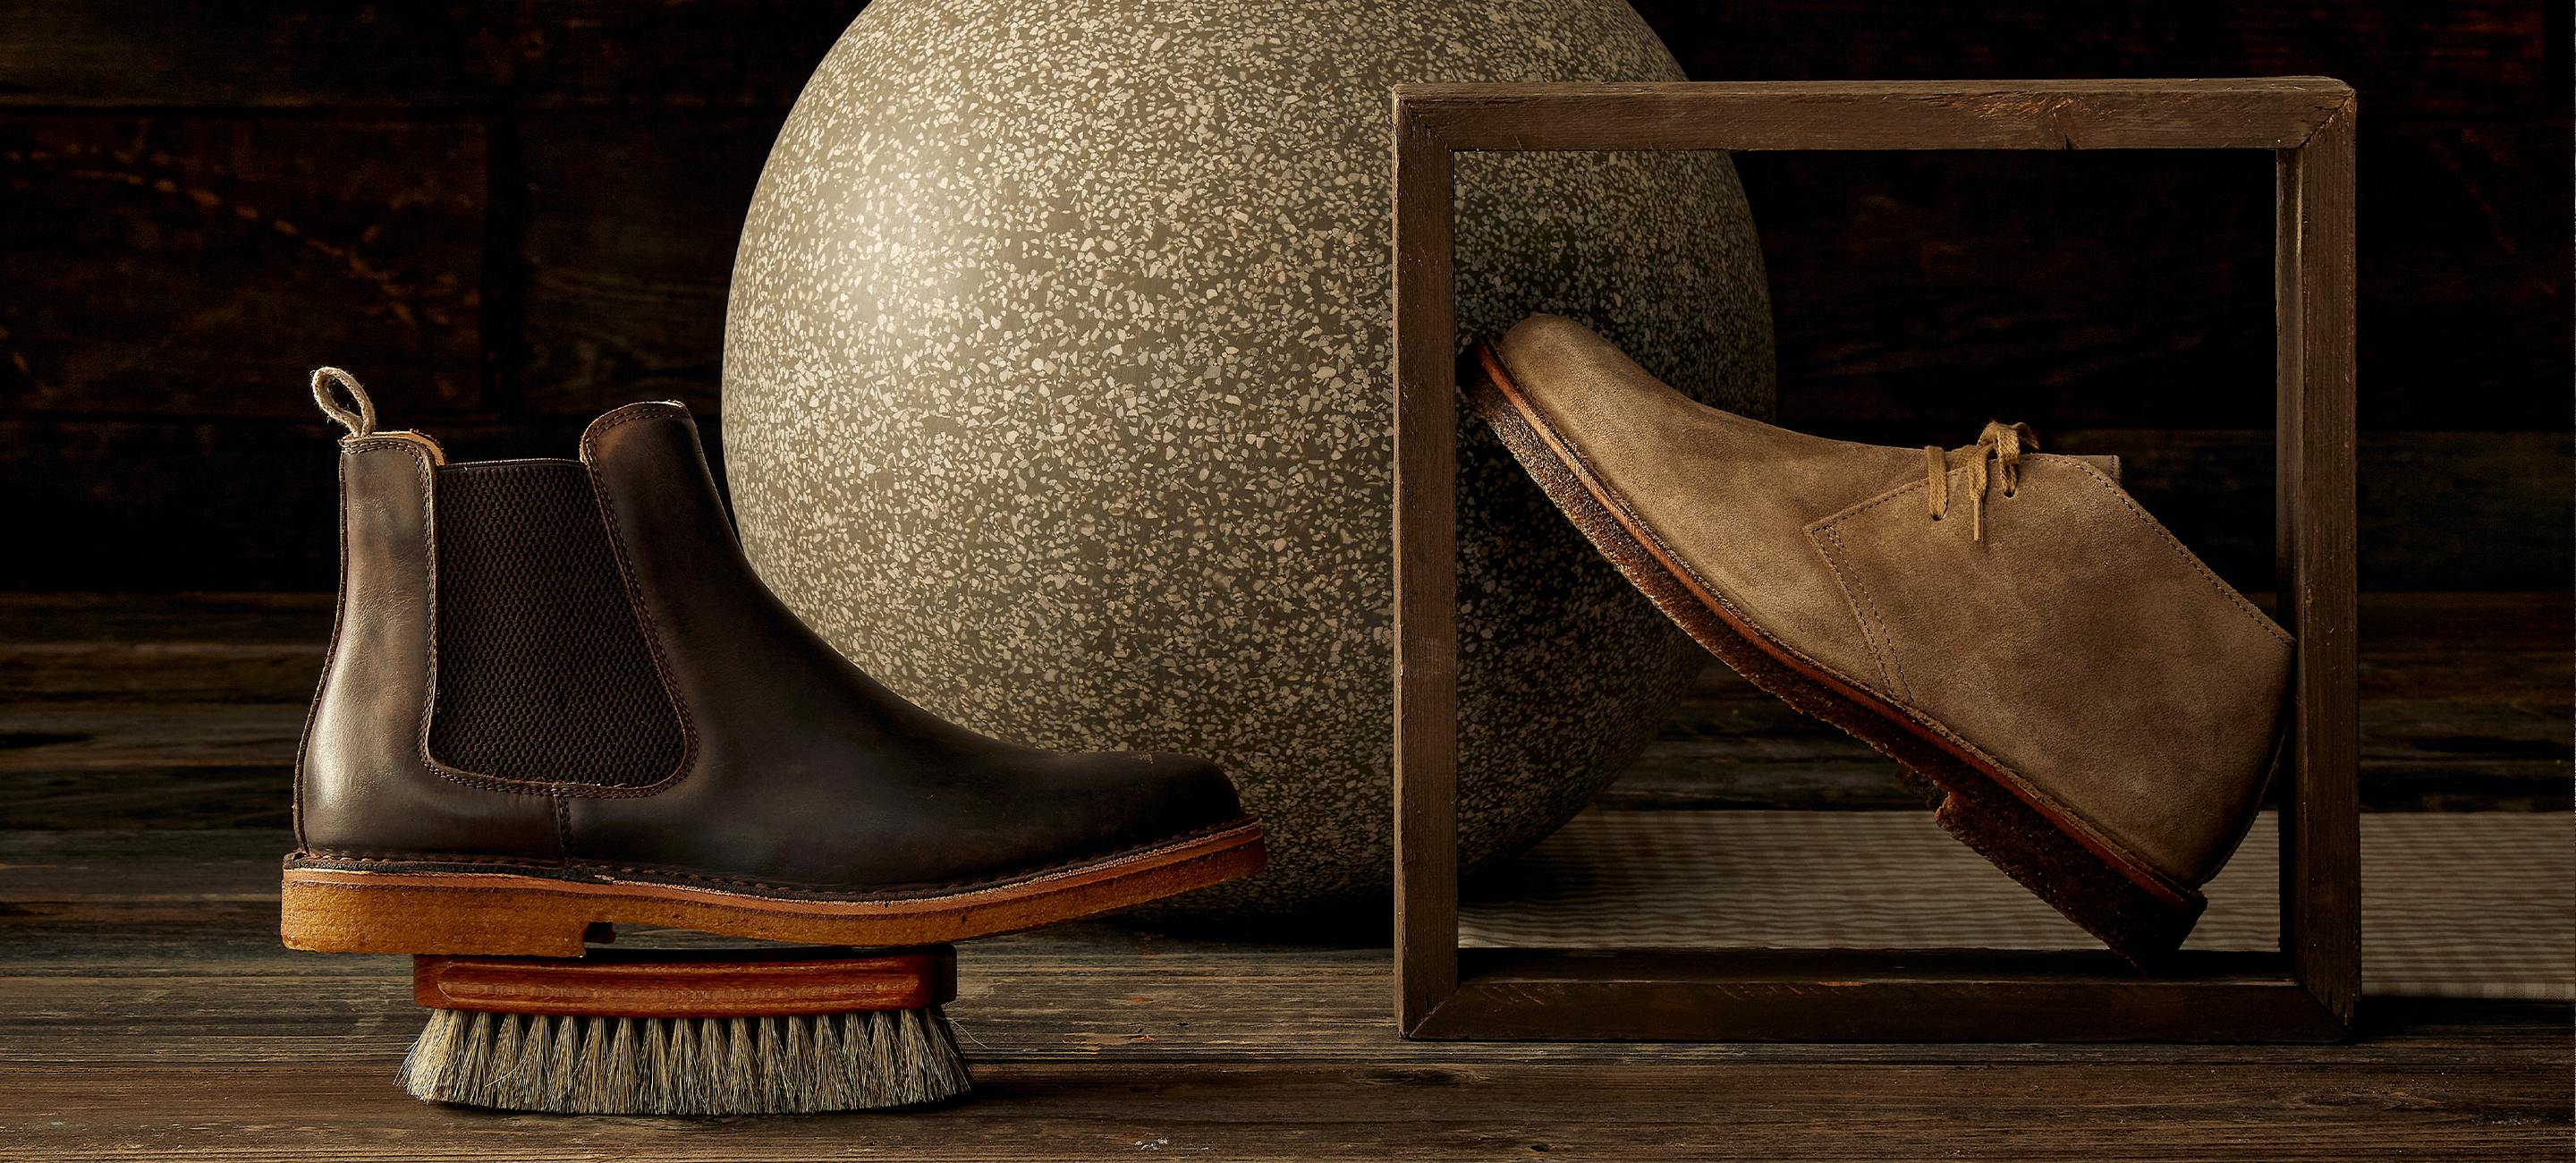 Artistic image of shoes with abstract objects